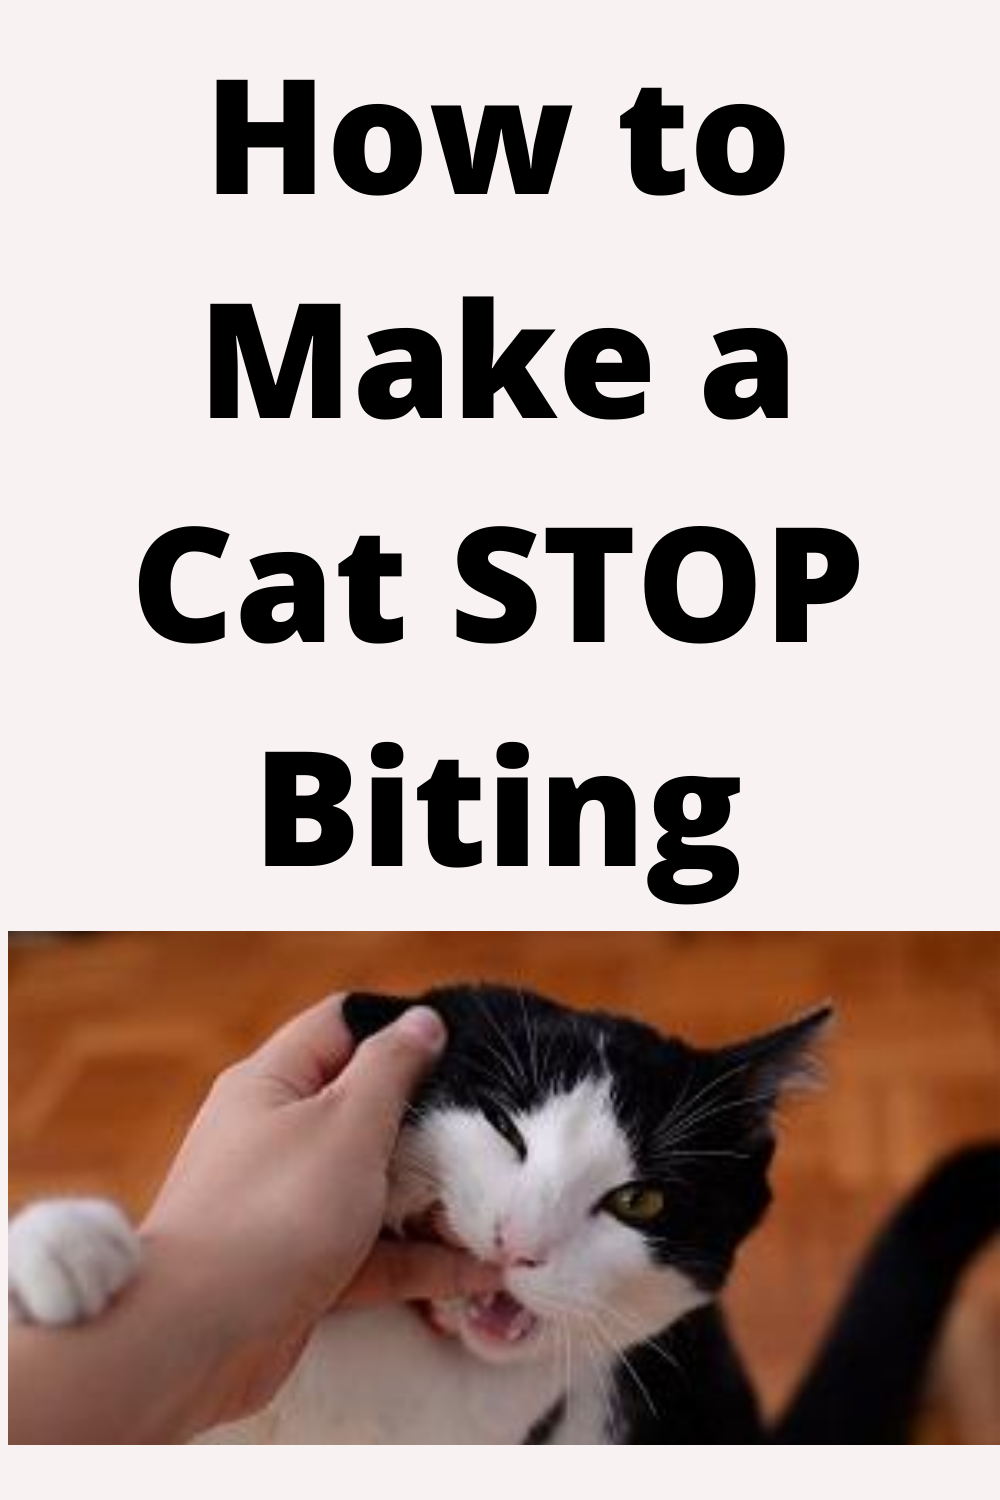 How to Make a Cat Stop Biting in 2020